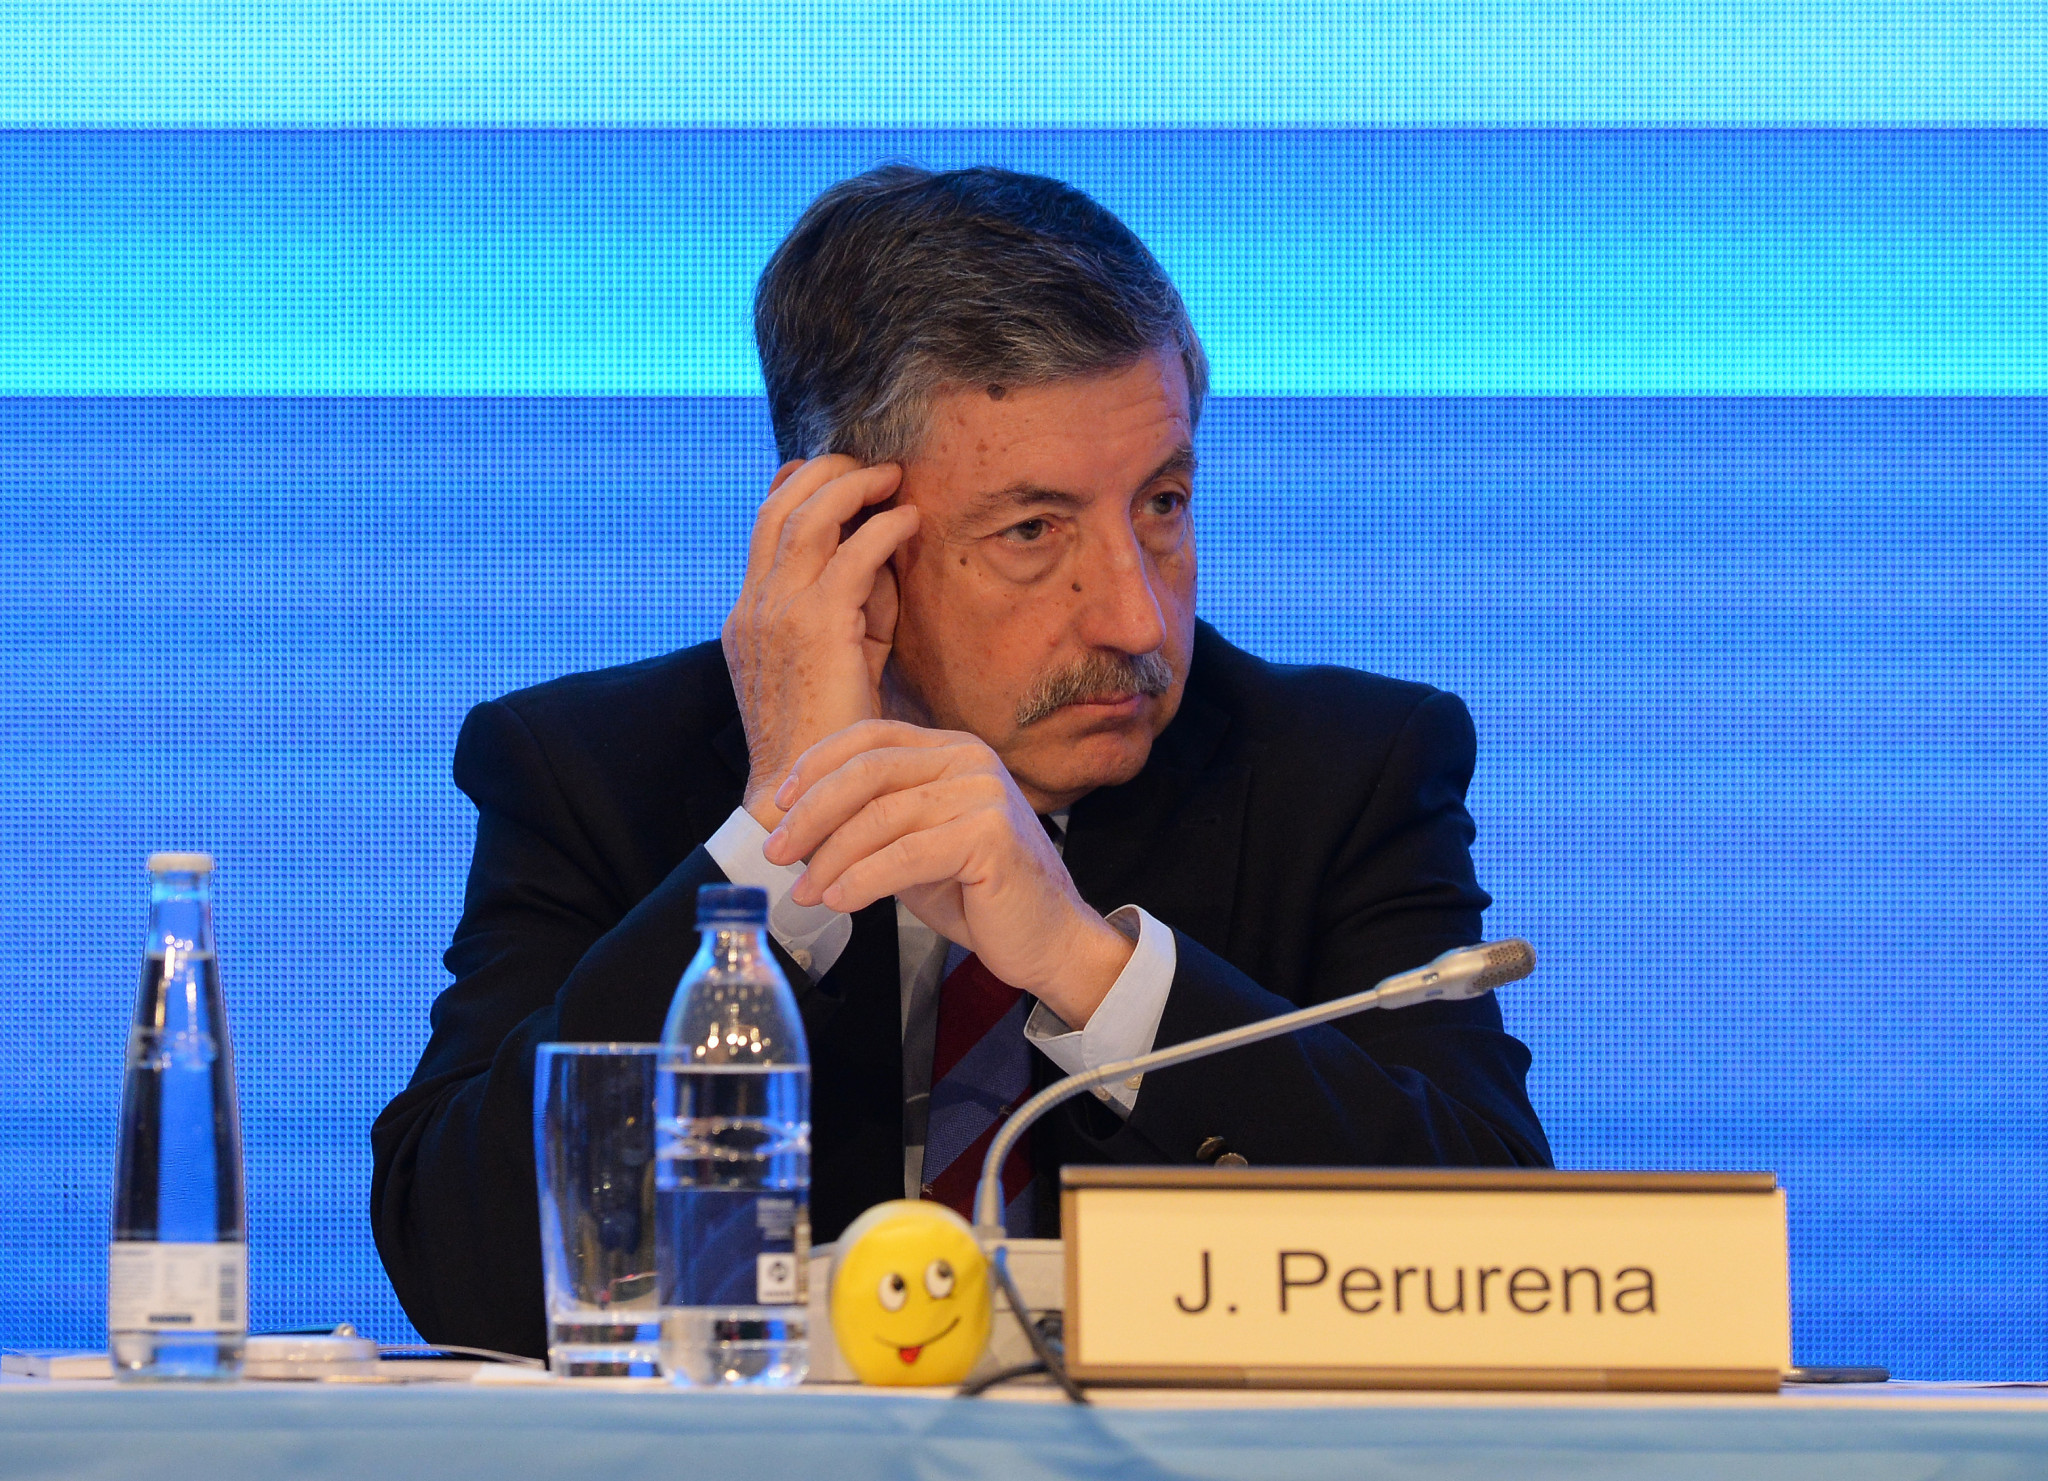 Current ICF President José Perurena is set to step down next year ©Getty Images